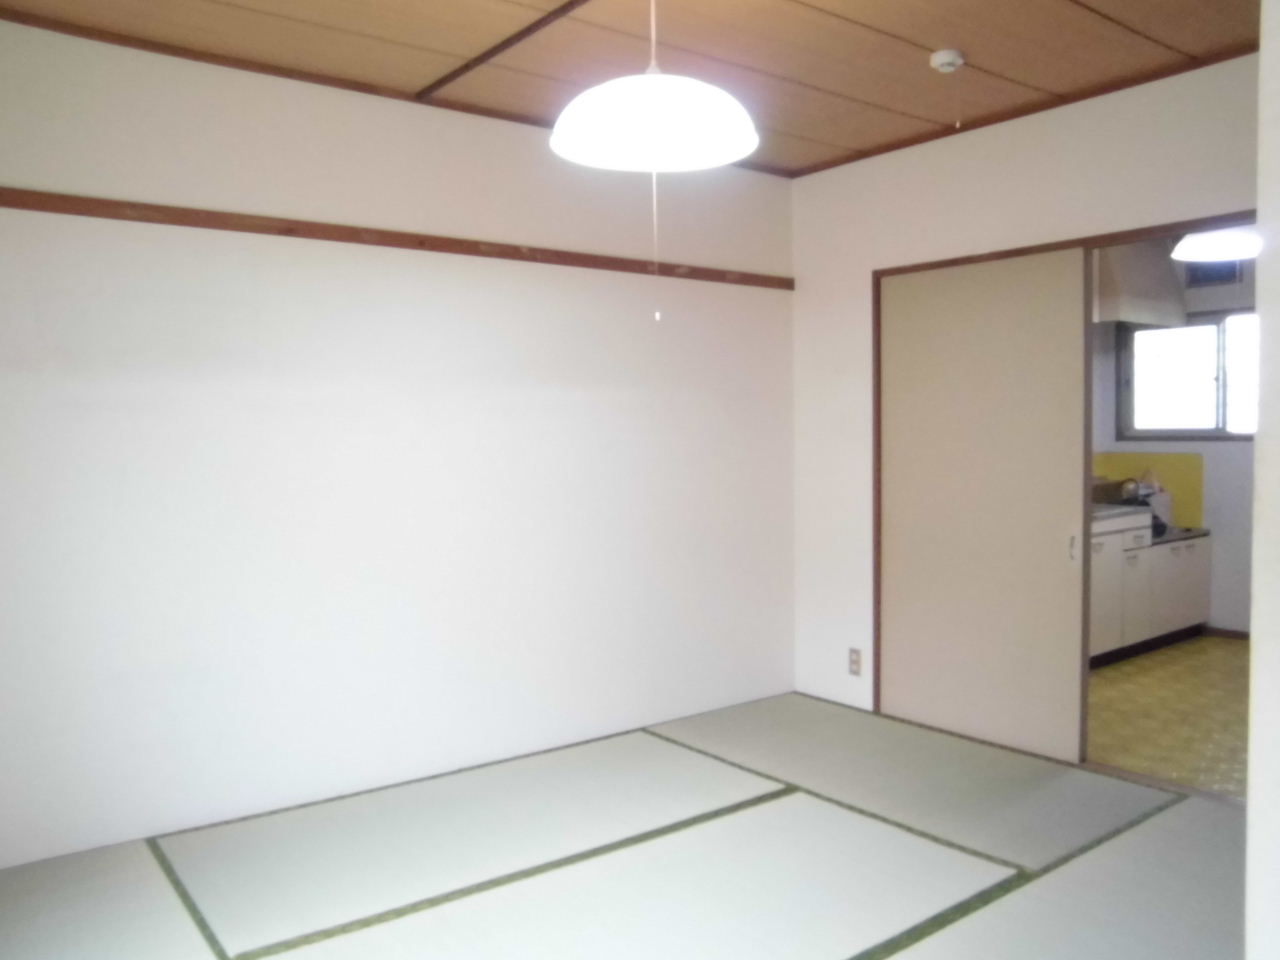 Other room space. Settled rather than Japanese-style room